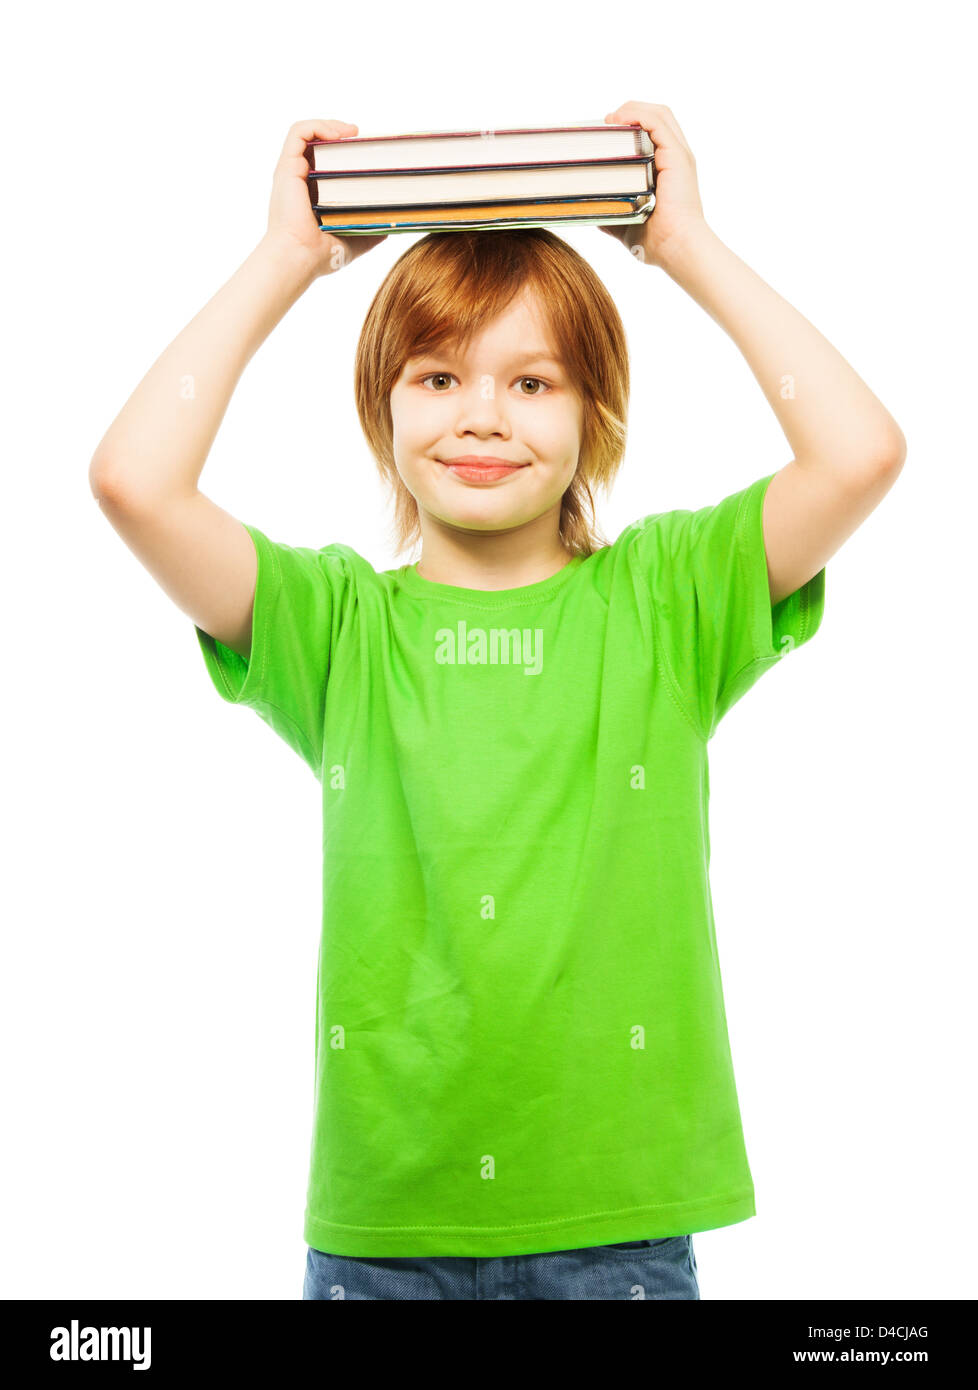 Happy Caucasian 9 years old boy in green shirt holding stack of books on top of head portrait, isolated on white Stock Photo